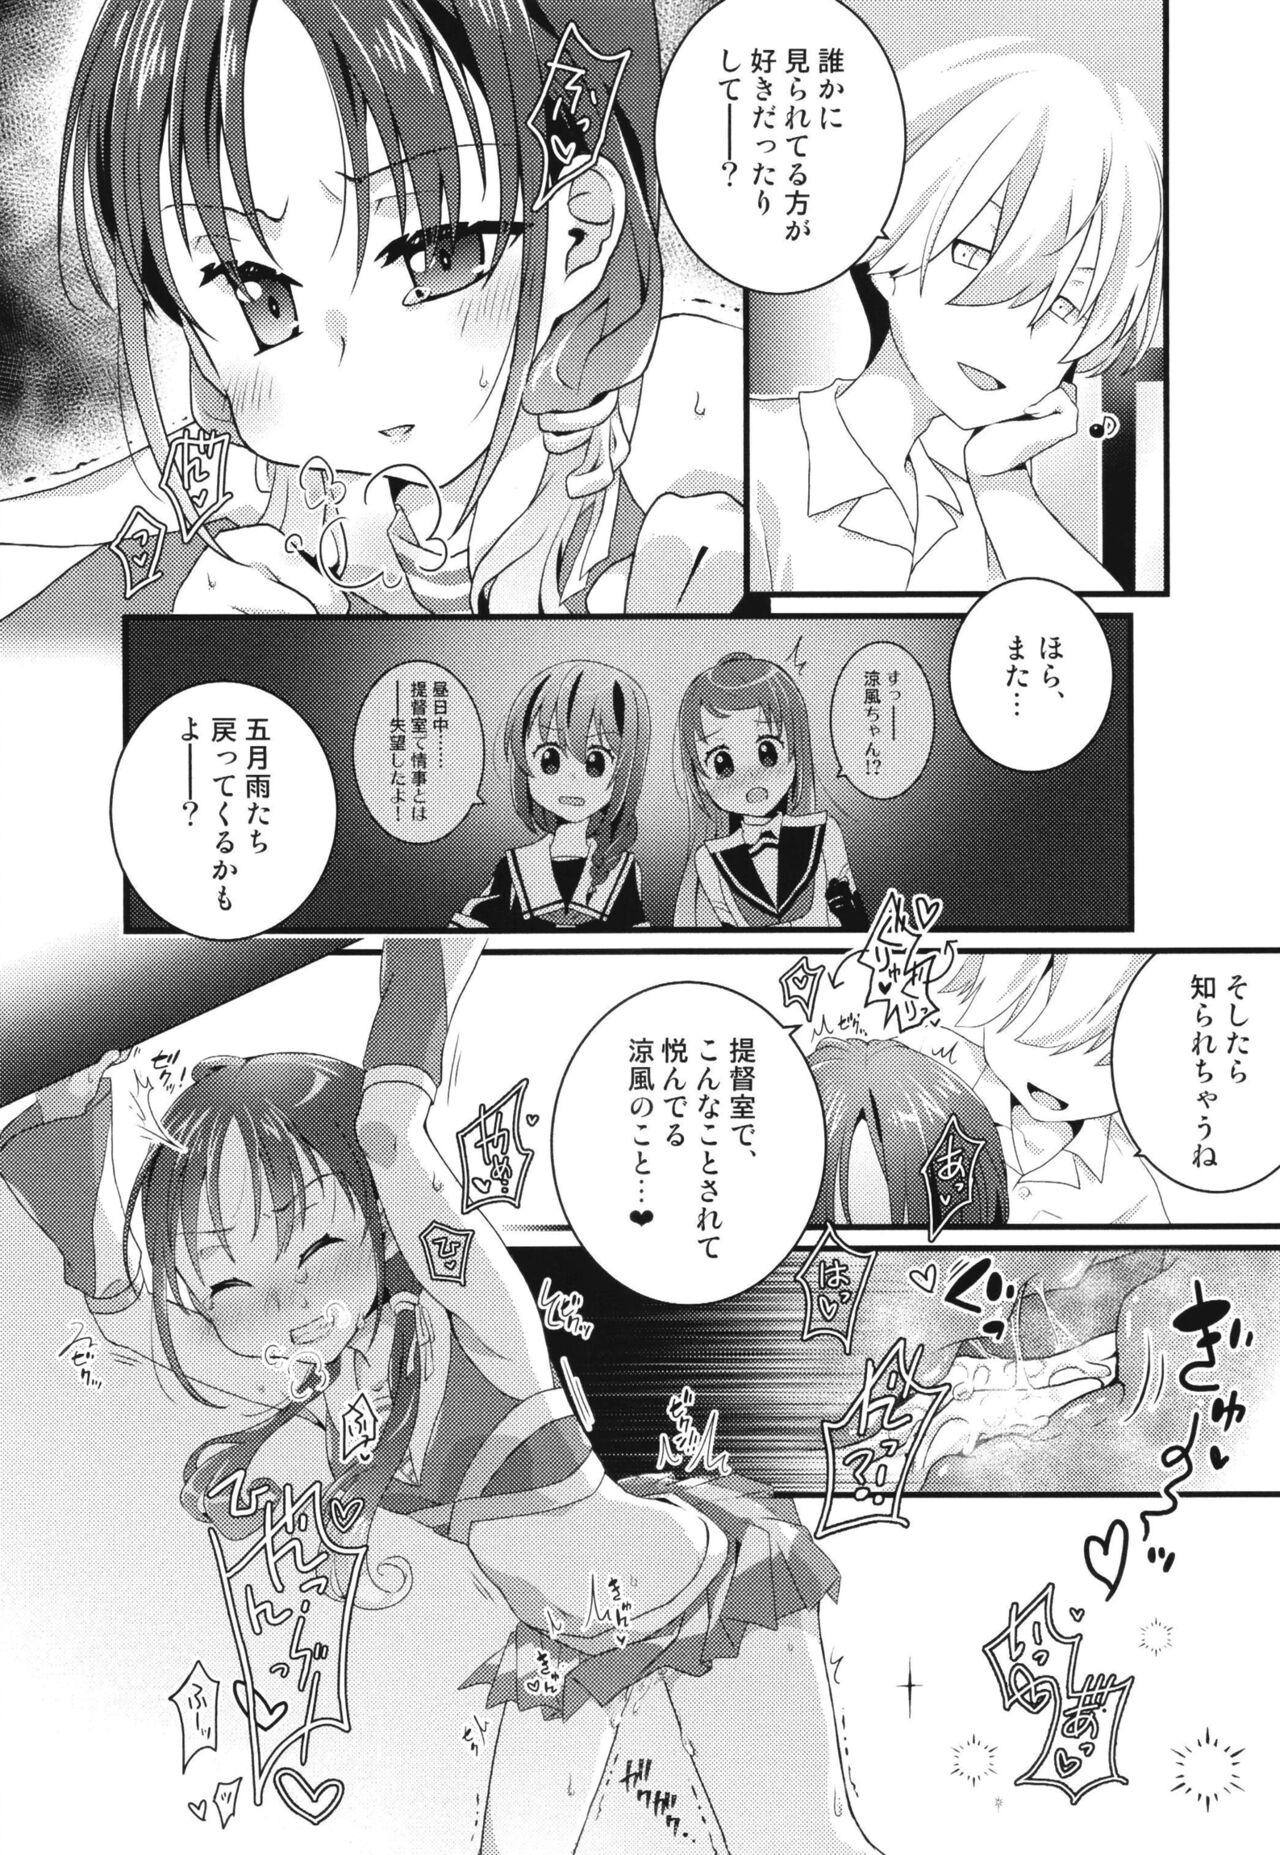 Oil Yah! Cheer! yeah! - Kantai collection Cam - Page 6